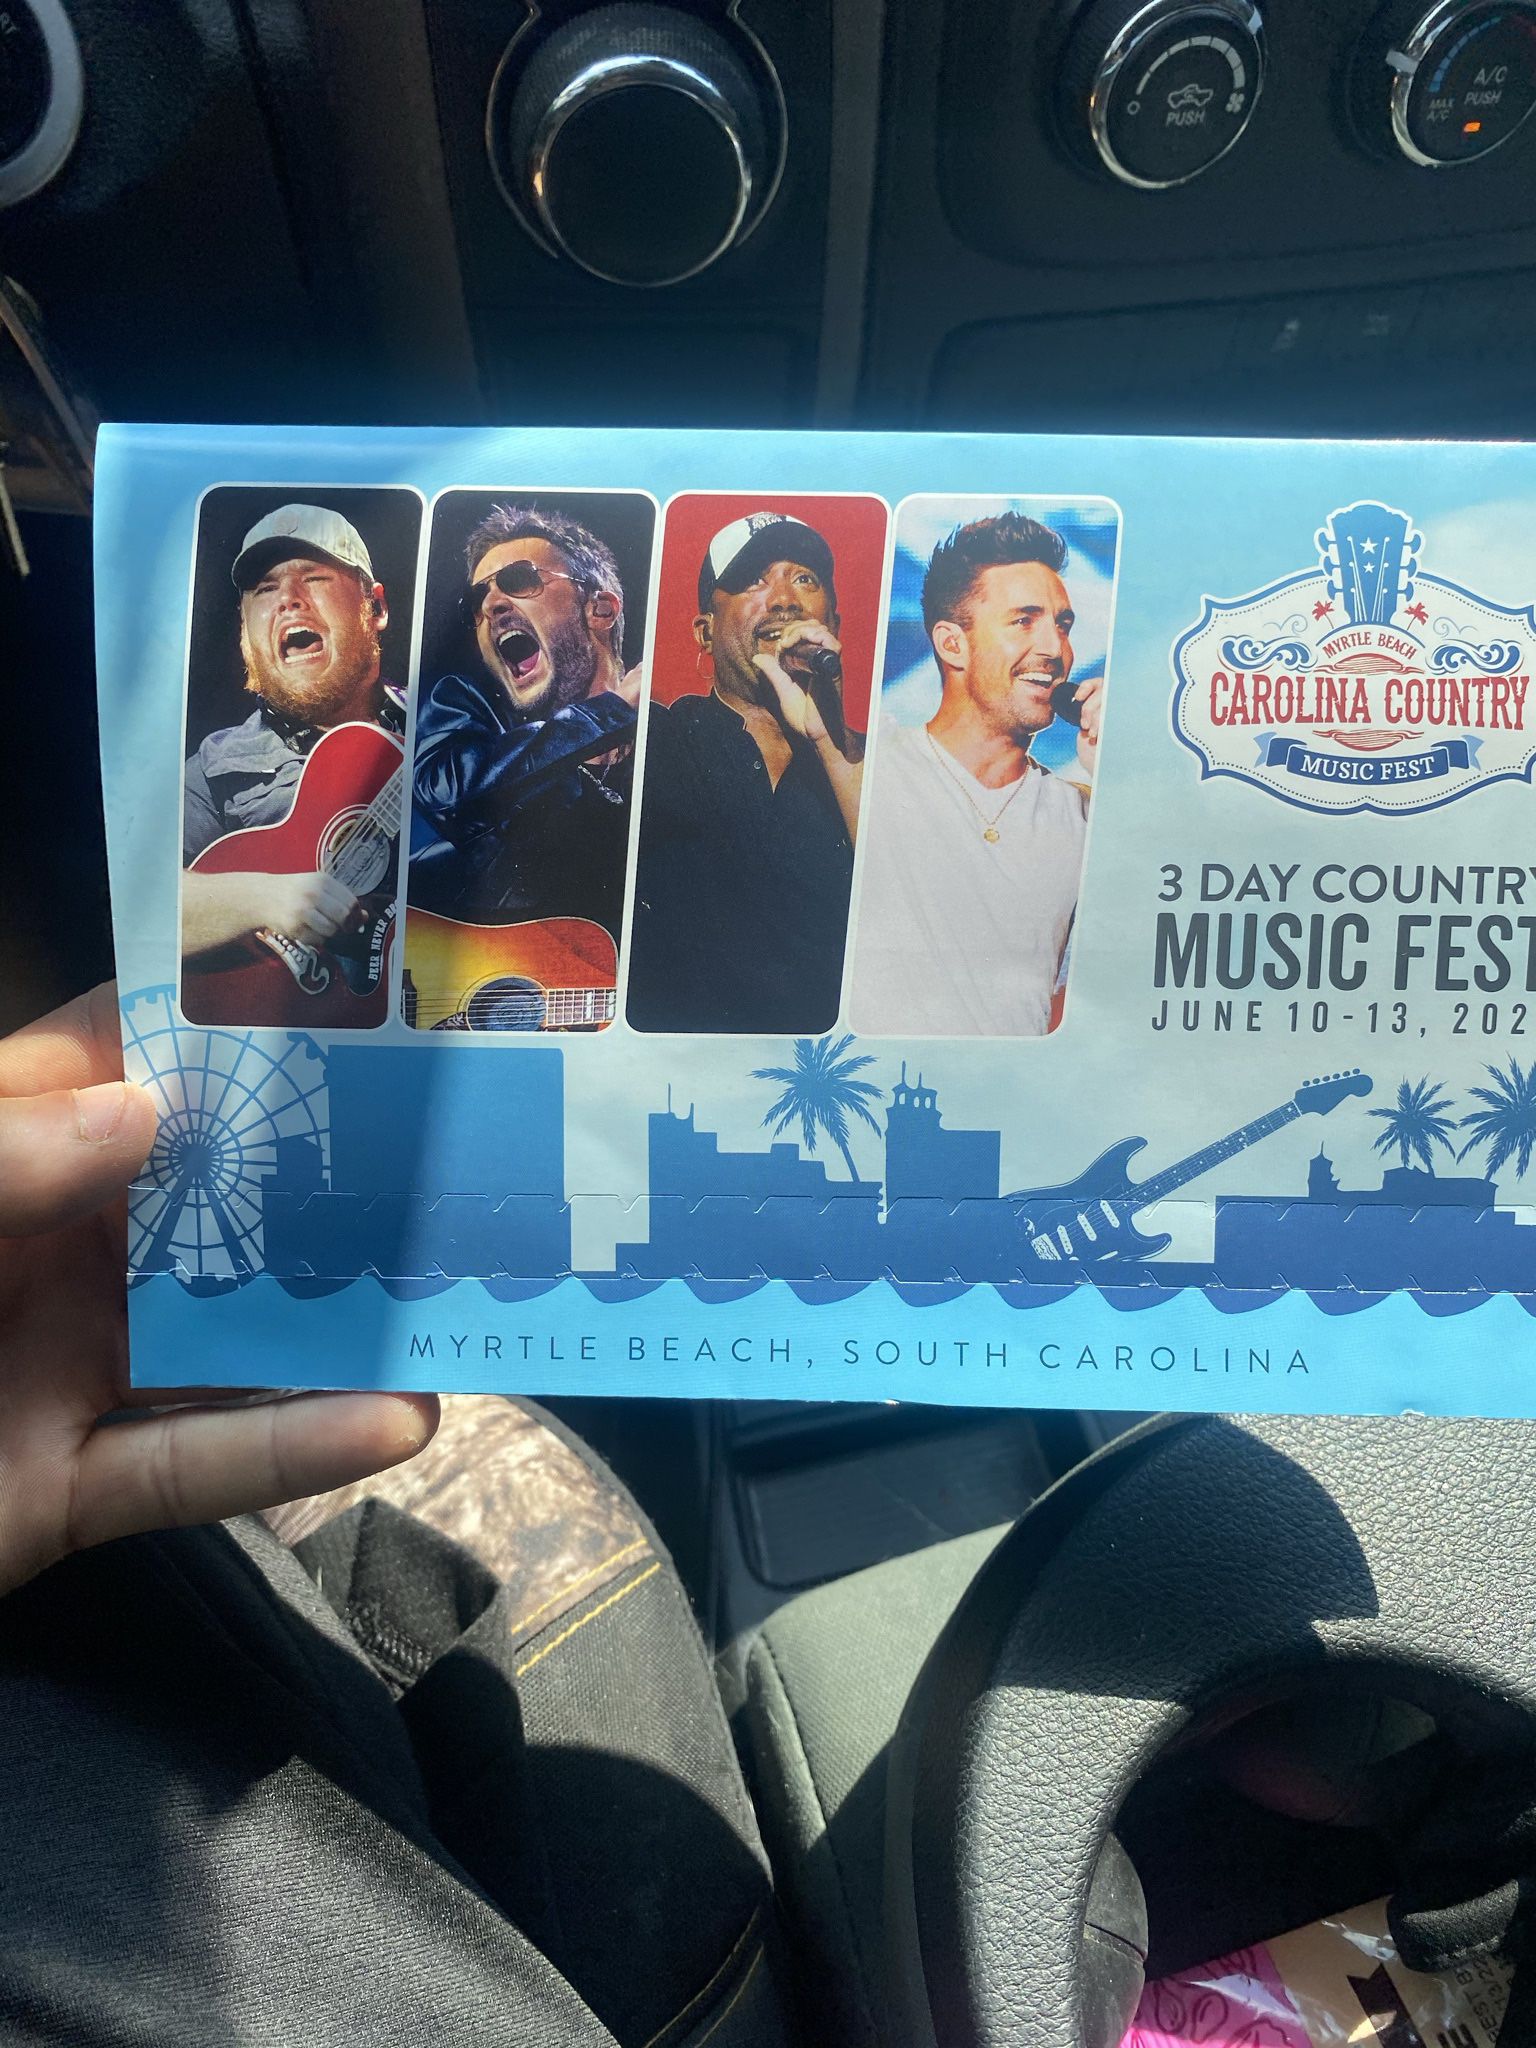 Carolina Country Music Fest Tickets 3 Day! 